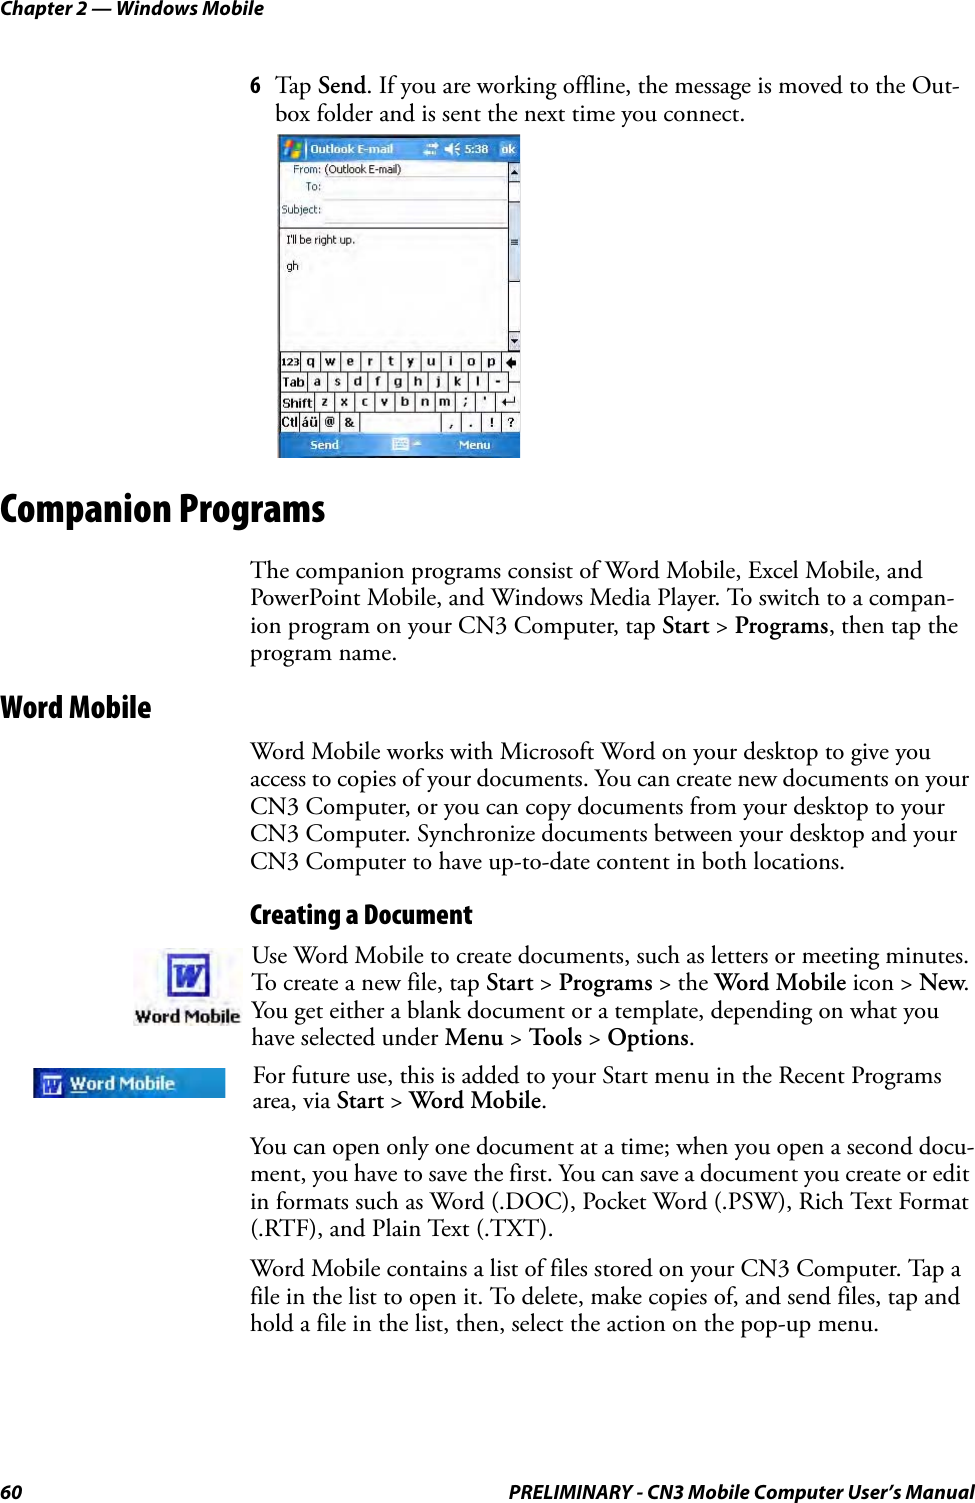 Chapter 2 — Windows Mobile60 PRELIMINARY - CN3 Mobile Computer User’s Manual6Tap Send. If you are working offline, the message is moved to the Out-box folder and is sent the next time you connect.Companion ProgramsThe companion programs consist of Word Mobile, Excel Mobile, and PowerPoint Mobile, and Windows Media Player. To switch to a compan-ion program on your CN3 Computer, tap Start &gt; Programs, then tap the program name.Word MobileWord Mobile works with Microsoft Word on your desktop to give you access to copies of your documents. You can create new documents on your CN3 Computer, or you can copy documents from your desktop to your CN3 Computer. Synchronize documents between your desktop and your CN3 Computer to have up-to-date content in both locations.Creating a DocumentYou can open only one document at a time; when you open a second docu-ment, you have to save the first. You can save a document you create or edit in formats such as Word (.DOC), Pocket Word (.PSW), Rich Text Format (.RTF), and Plain Text (.TXT).Word Mobile contains a list of files stored on your CN3 Computer. Tap a file in the list to open it. To delete, make copies of, and send files, tap and hold a file in the list, then, select the action on the pop-up menu.Use Word Mobile to create documents, such as letters or meeting minutes. To create a new file, tap Start &gt; Programs &gt; the Word Mobile icon &gt; New. You get either a blank document or a template, depending on what you have selected under Menu &gt; Tools &gt; Options.For future use, this is added to your Start menu in the Recent Programs area, via Start &gt; Word Mobile. 